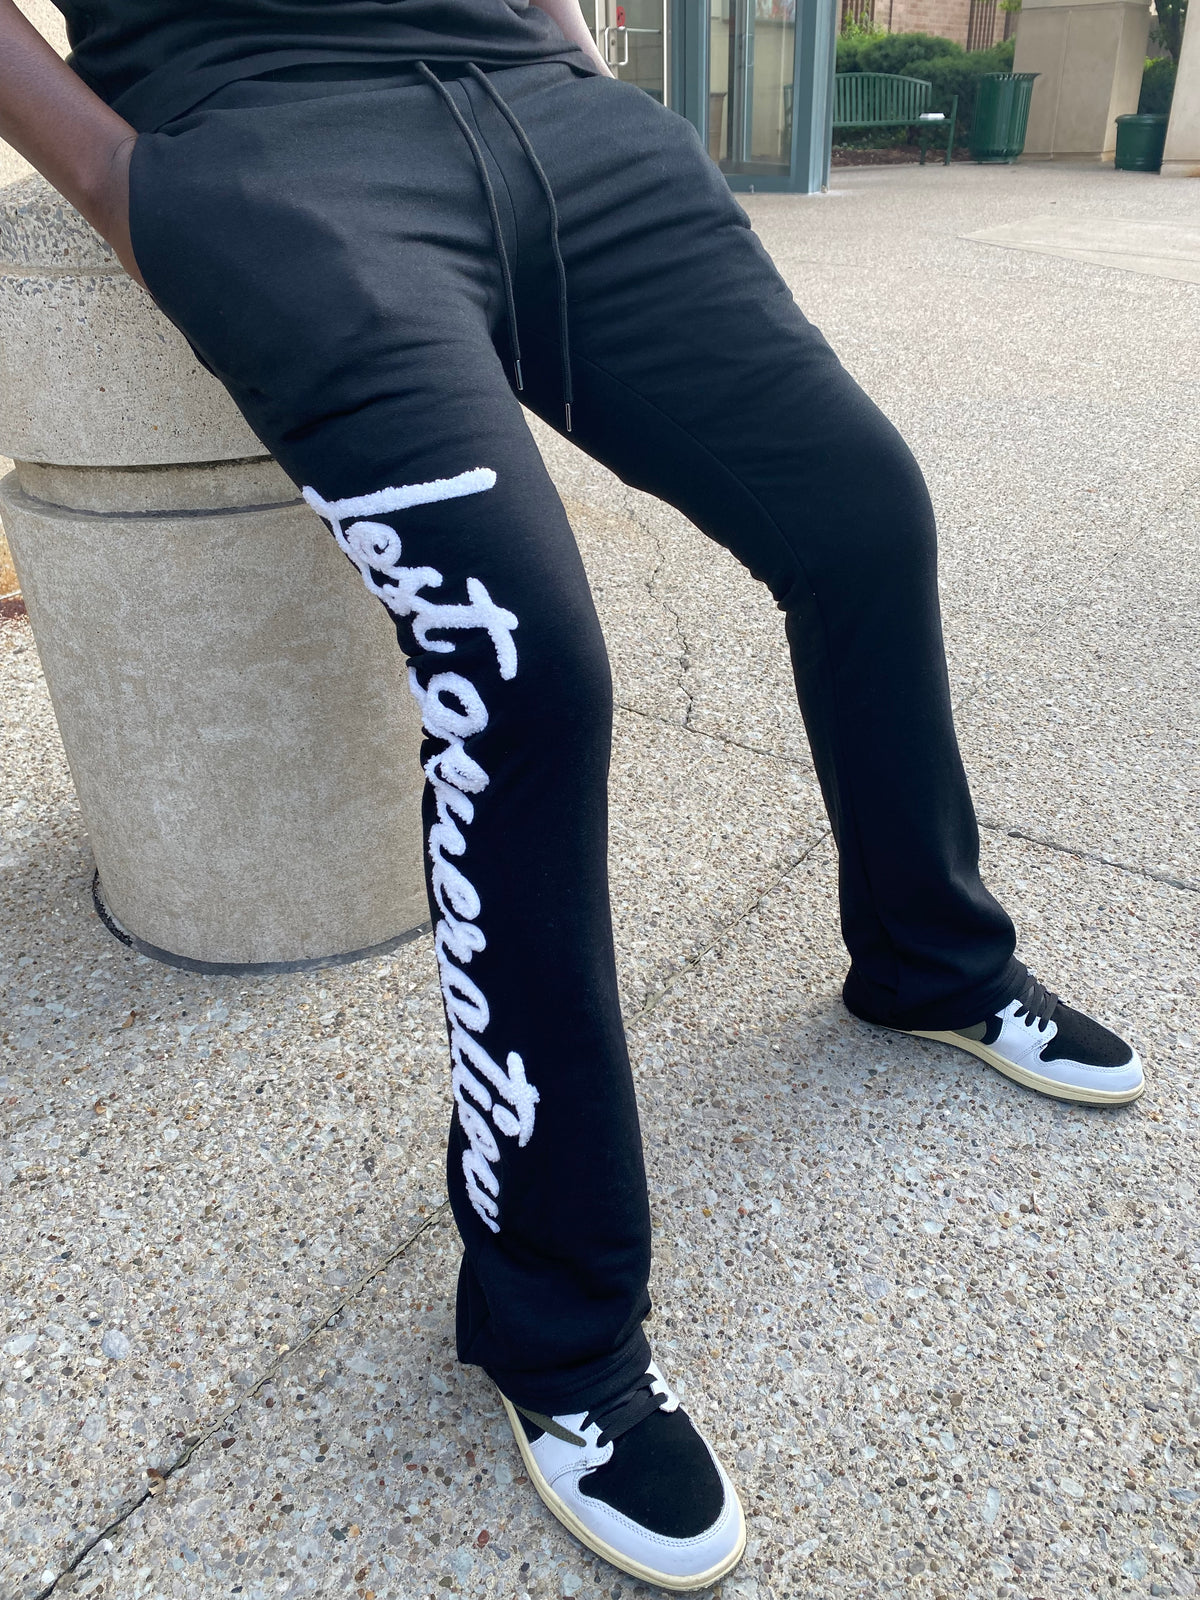 "Lost Generations" 2 Stacked Sweatpants - Black